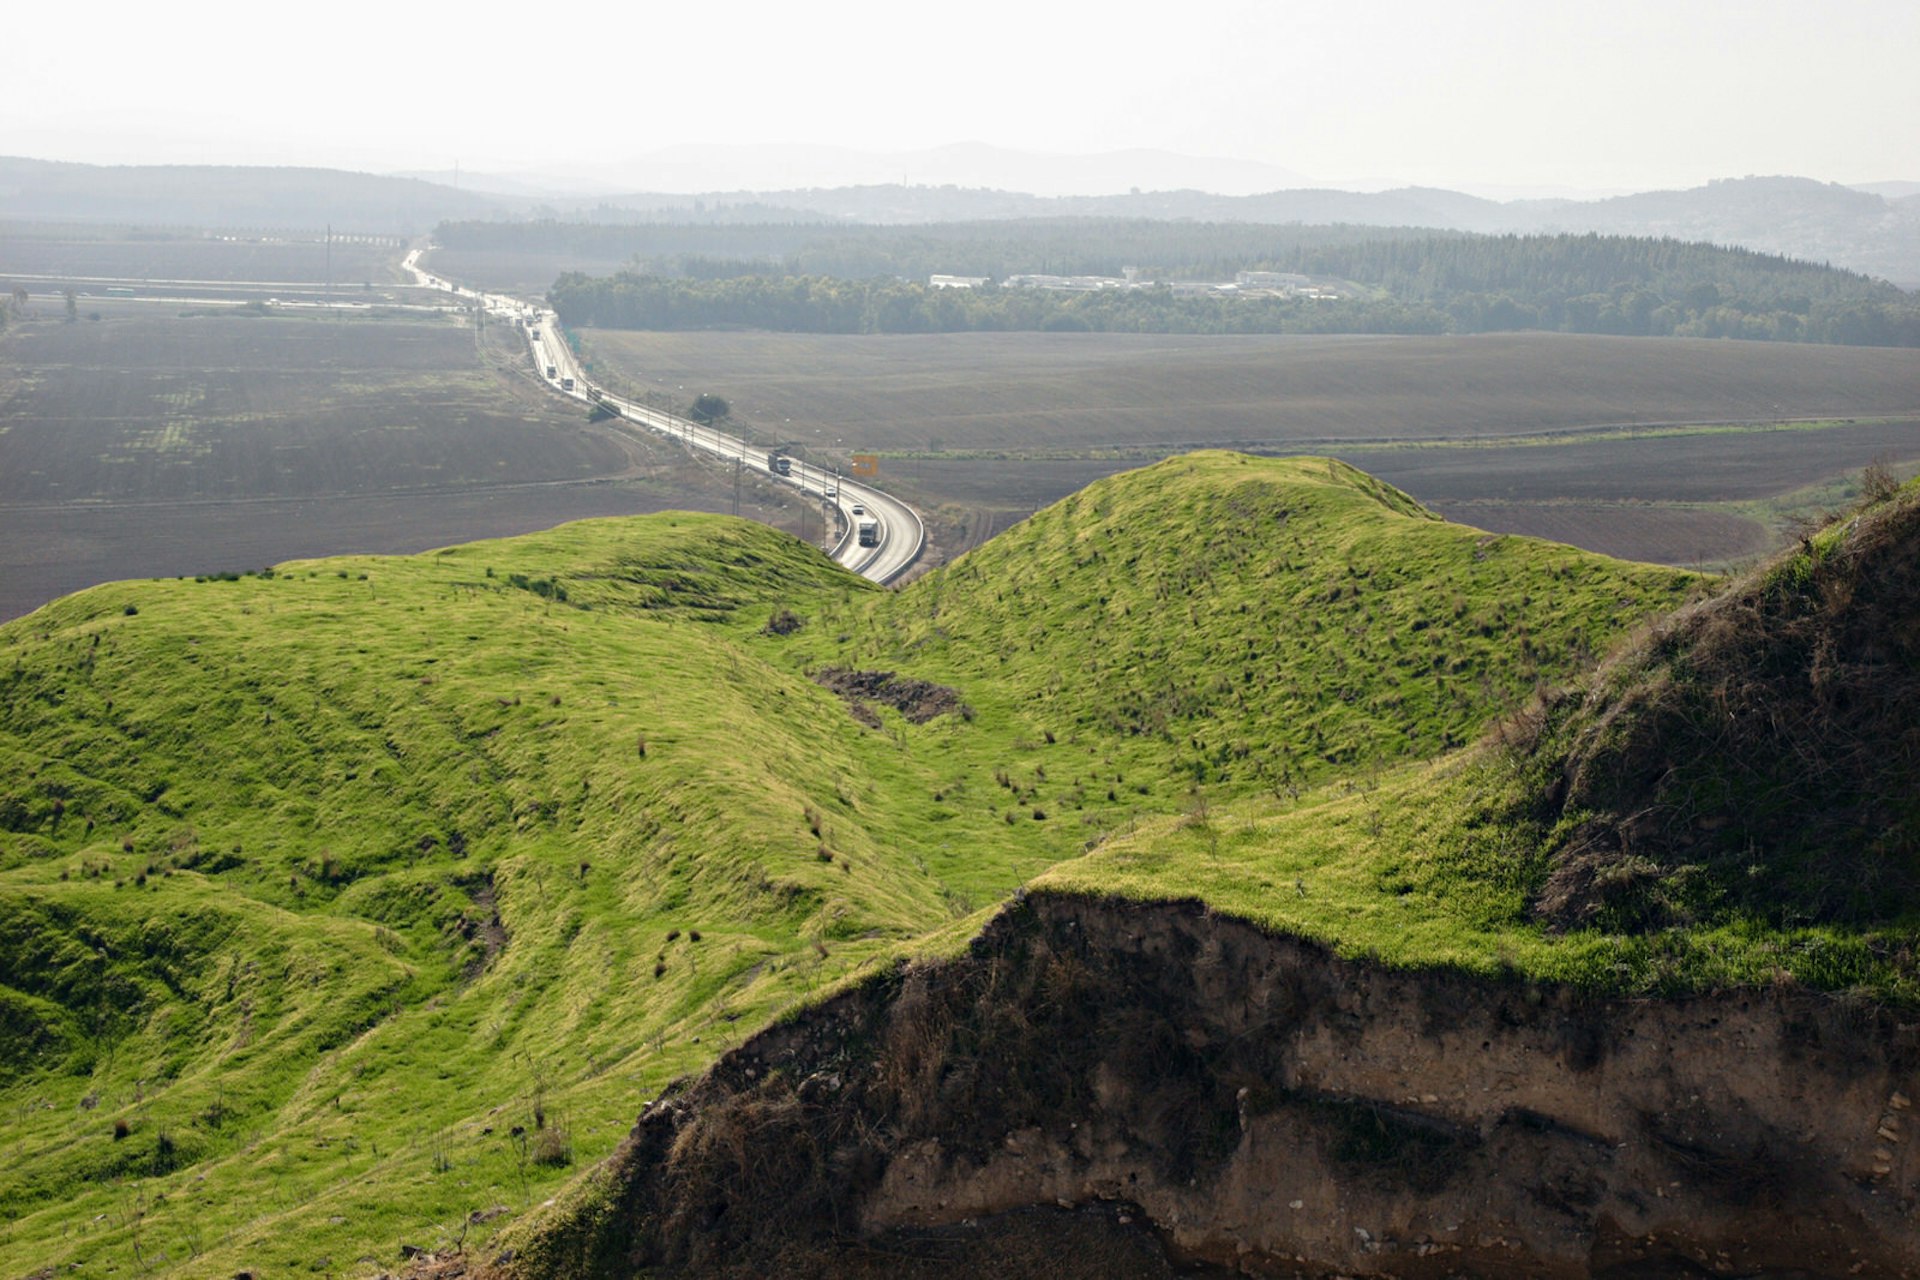 Tel Megiddo (Armageddon) overlooking the Valley of Jezreel, Israel. In the foreground is where the archaeologists were digging. Image by Dan Porges / Getty Images